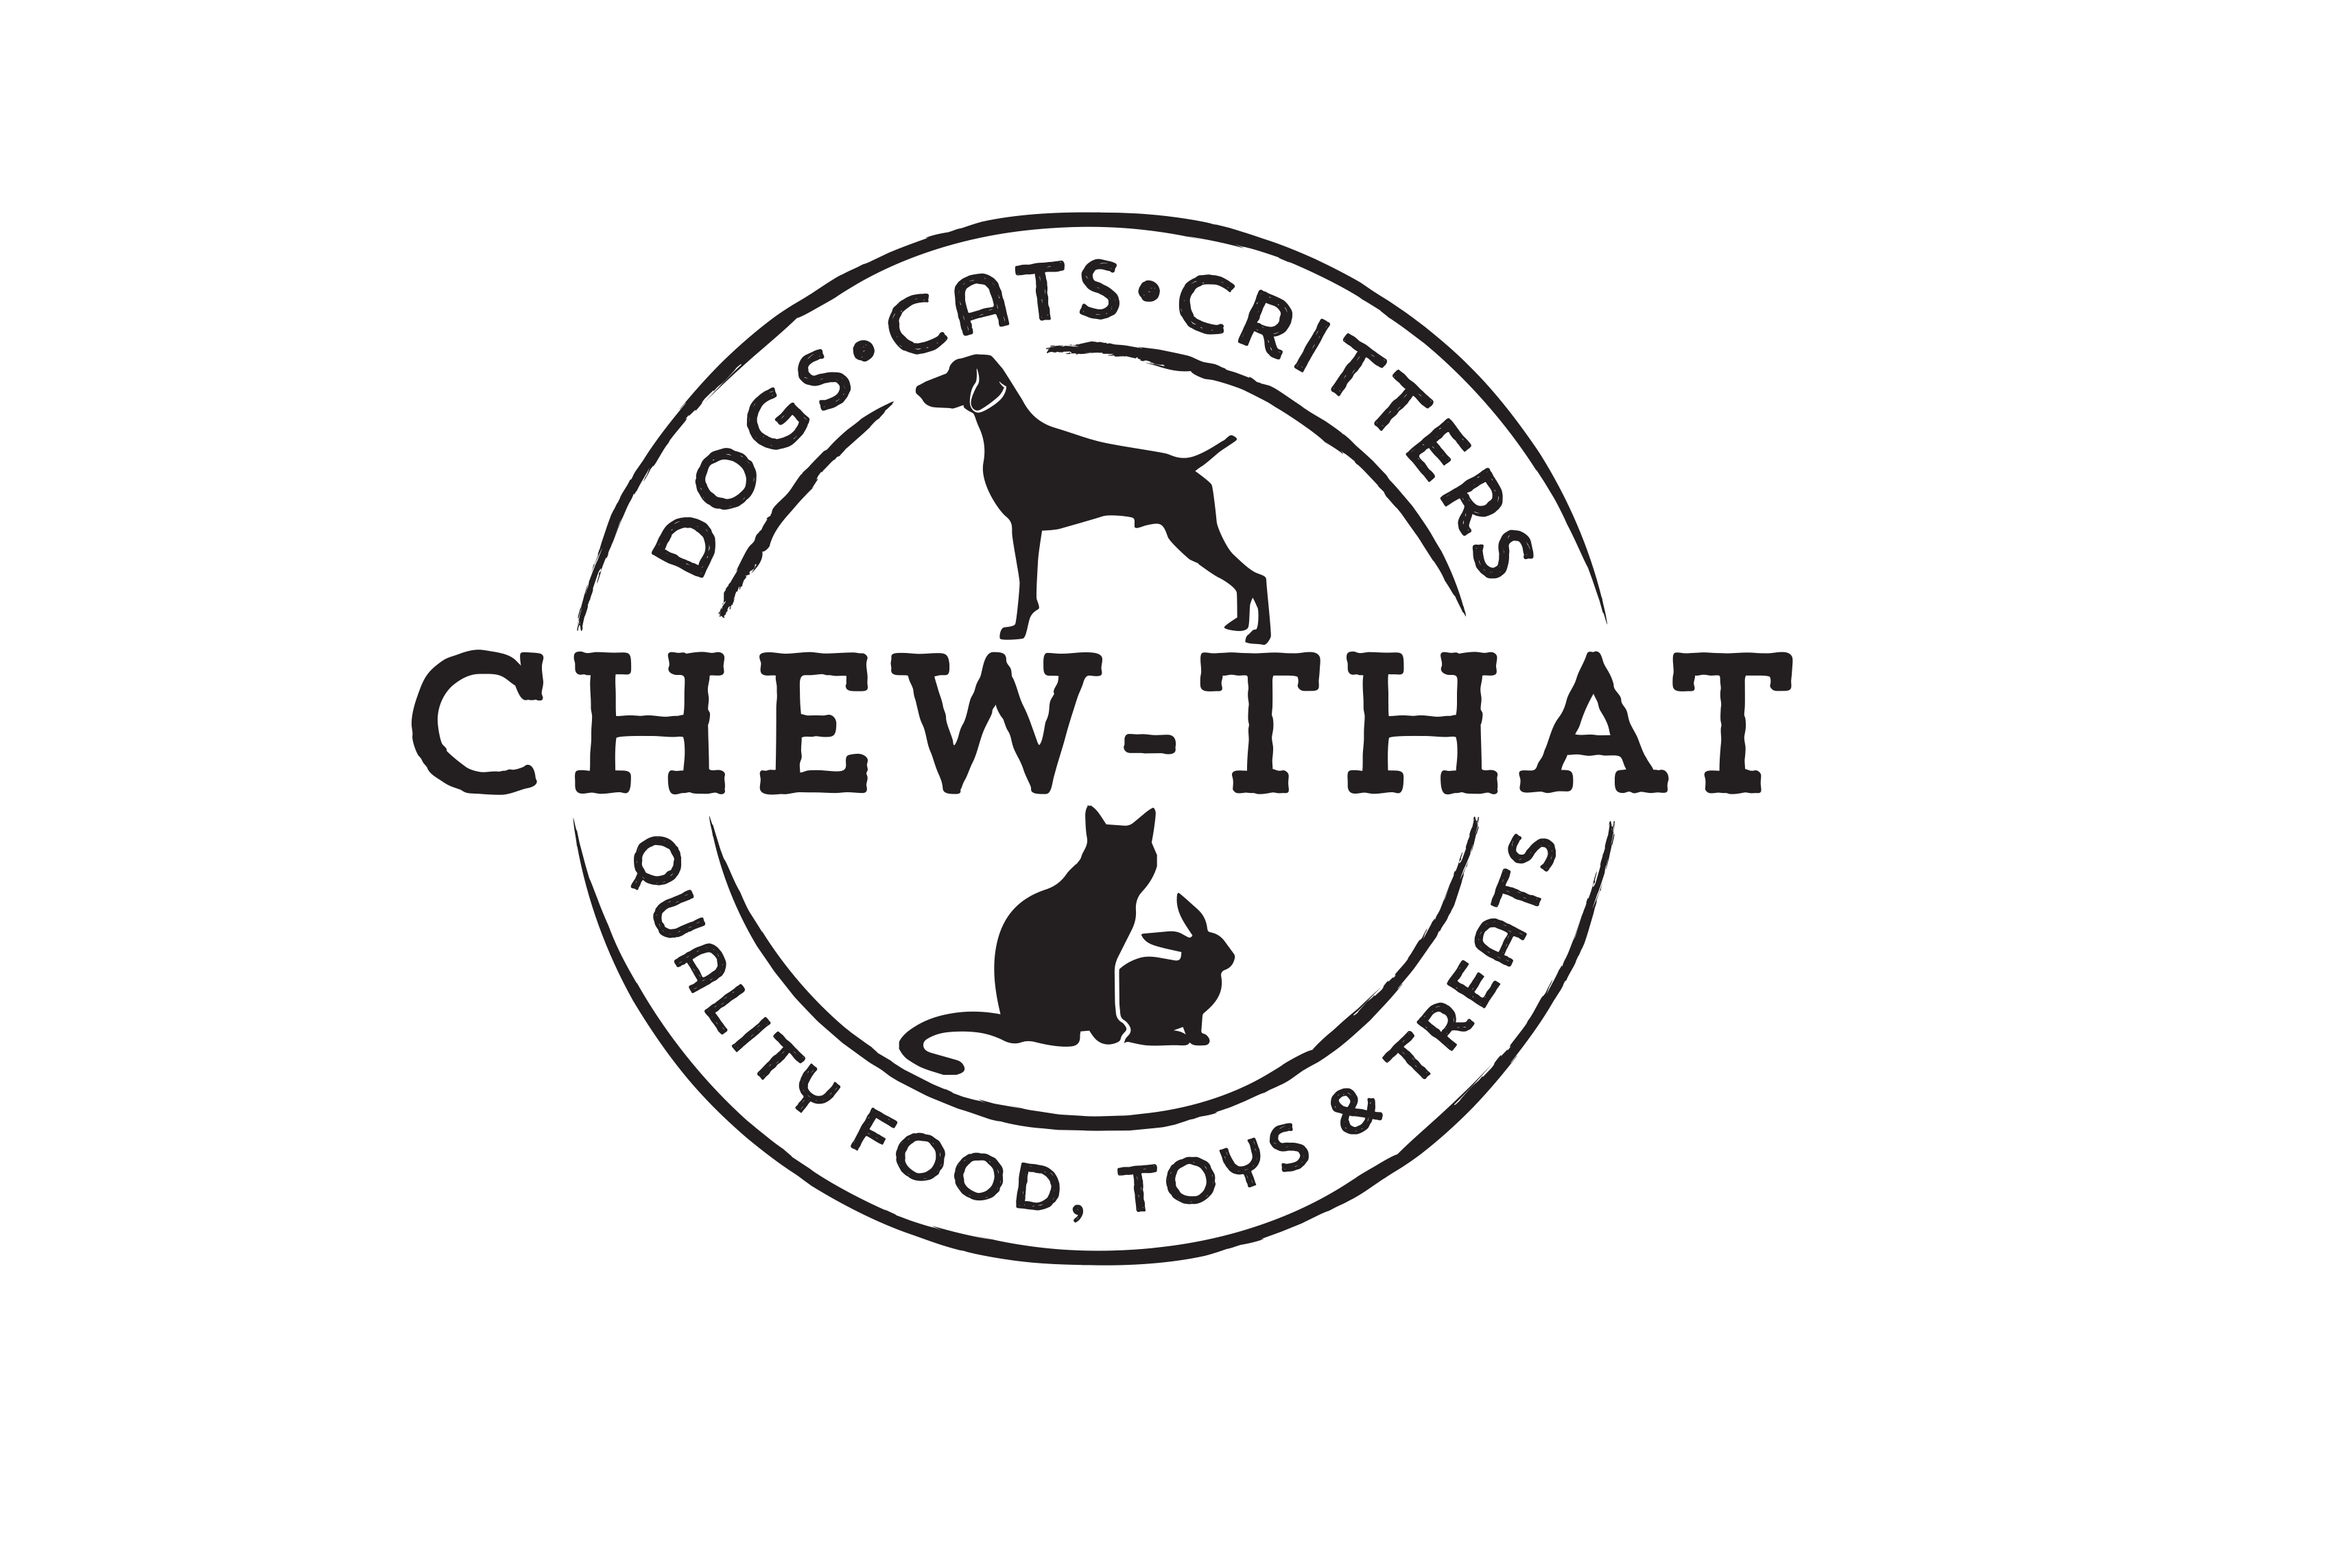 Quality Food, Toys and Treats - Chew-That